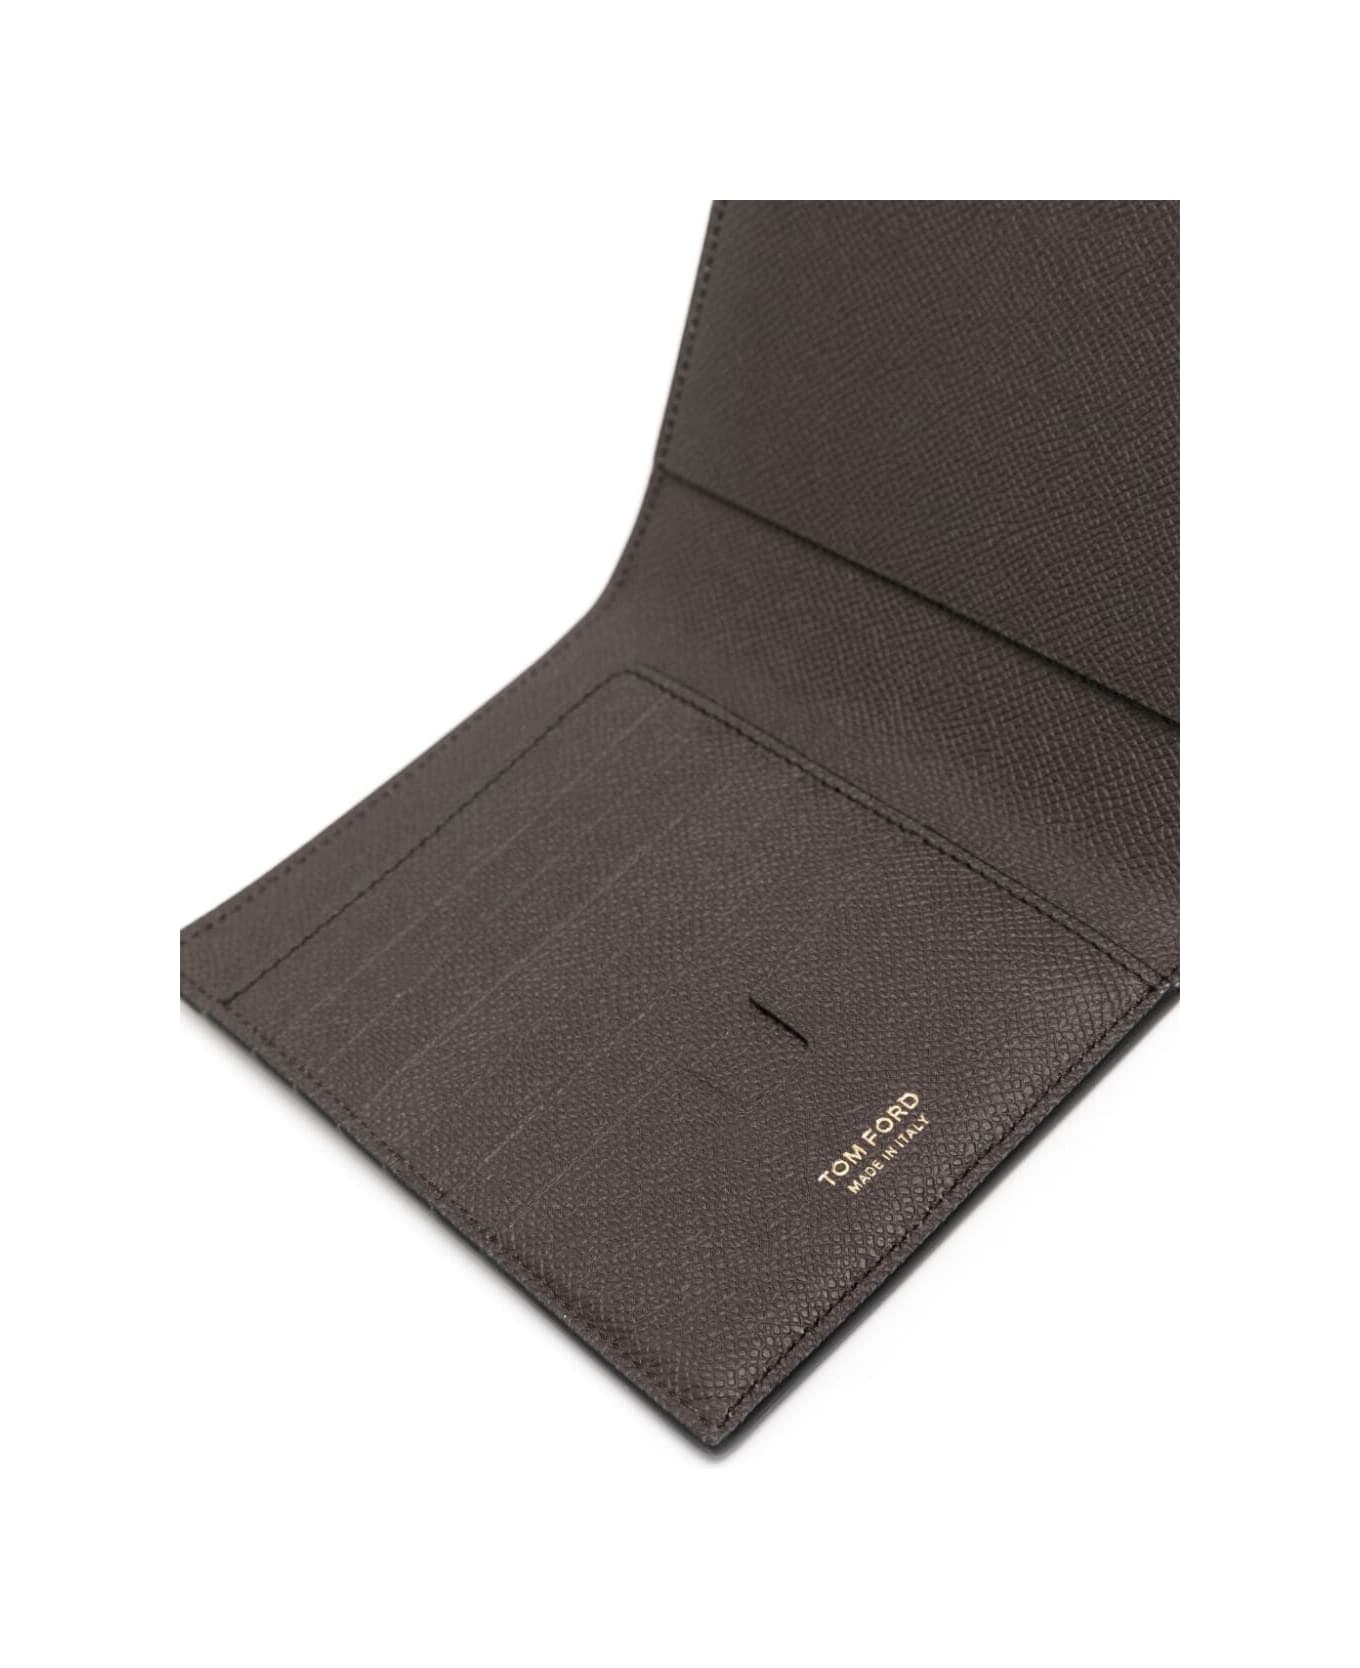 Tom Ford Stationary Wallet - Chocolate 財布